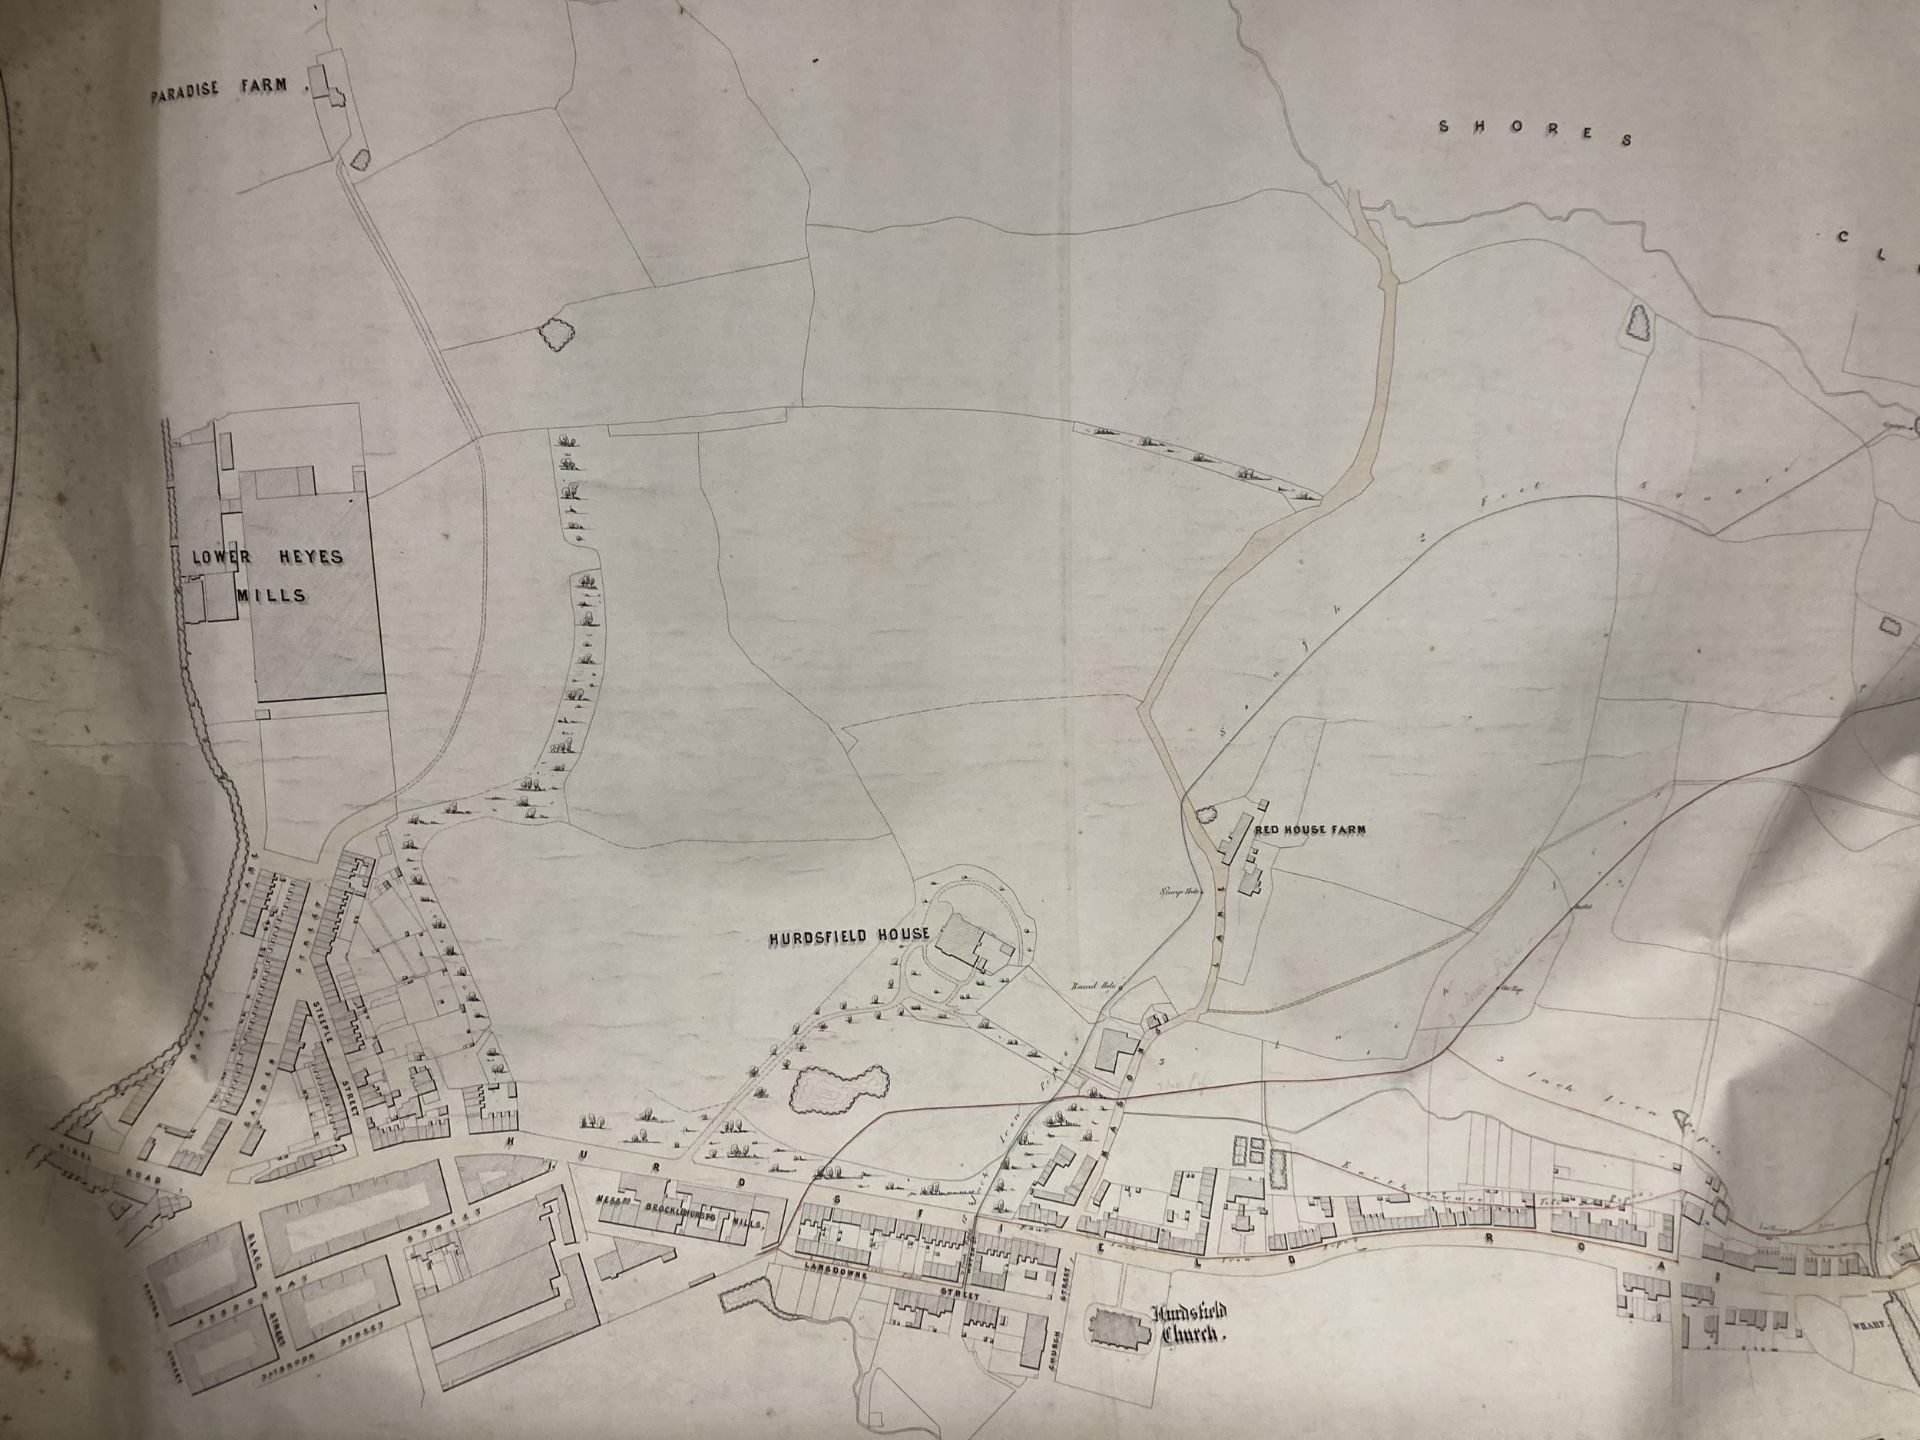 AN OLD ORDNANCE SURVEY MAP OF AREAS IN MACCLESFIELD TO INCLUDE MACCLESFIELD CANAL, HURDSFIELD HOUSE,